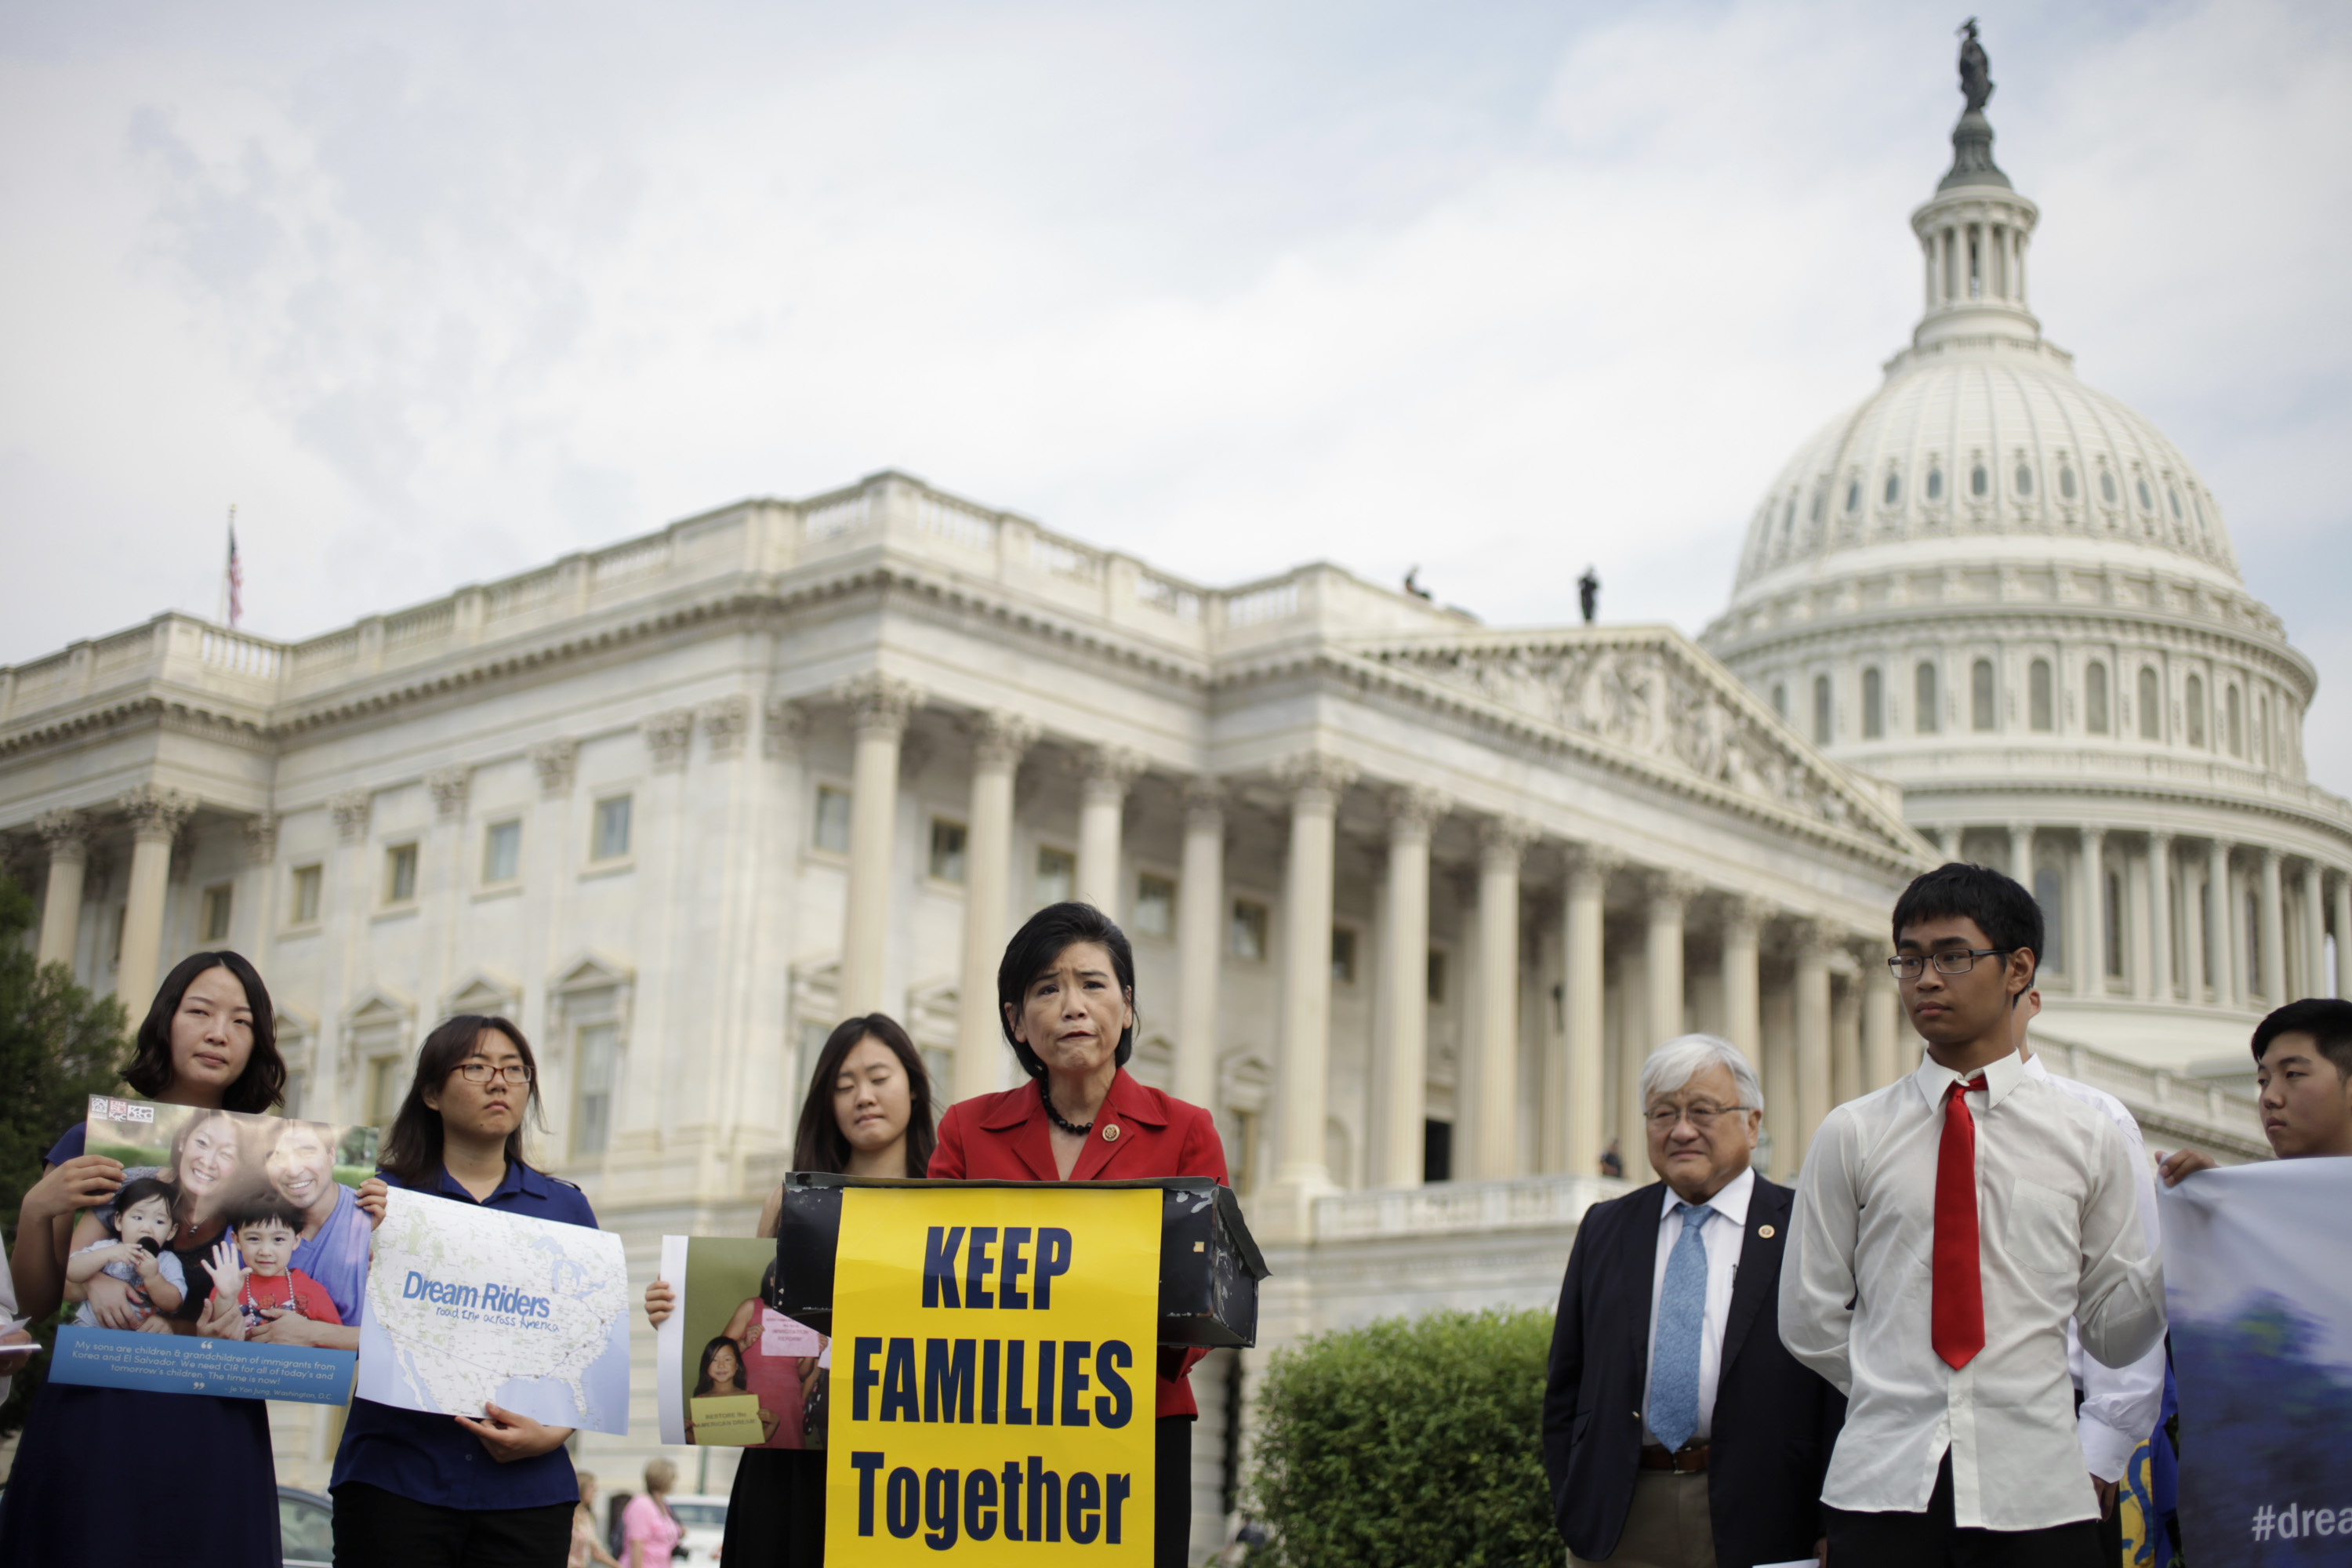 Judy Chu, D-Calif., speaks outside the Capitol Wednesday in support of immigration reform and the DREAM riders. The riders, a group of undocumented students will be visiting nine cities over 10 days to raise awareness about immigration reform. (Rob Denton/SHFWire)